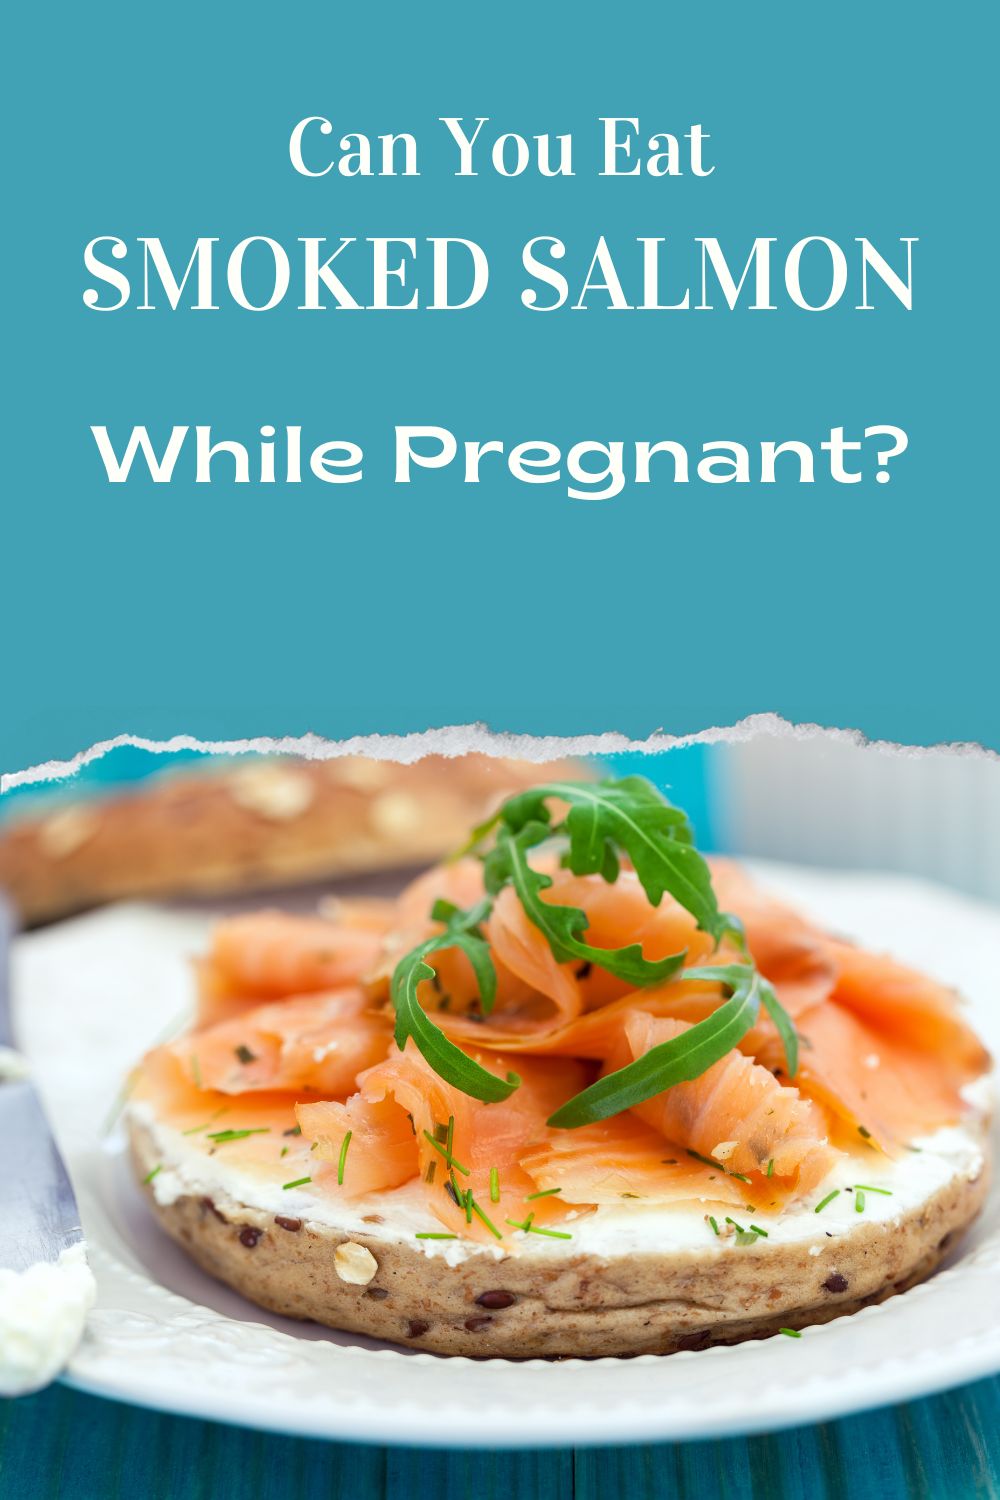 Discover the Truth About Smoked Salmon: Health Risks and Safe Enjoyment. Learn how to protect vulnerable groups and savour this delicacy worry-free.